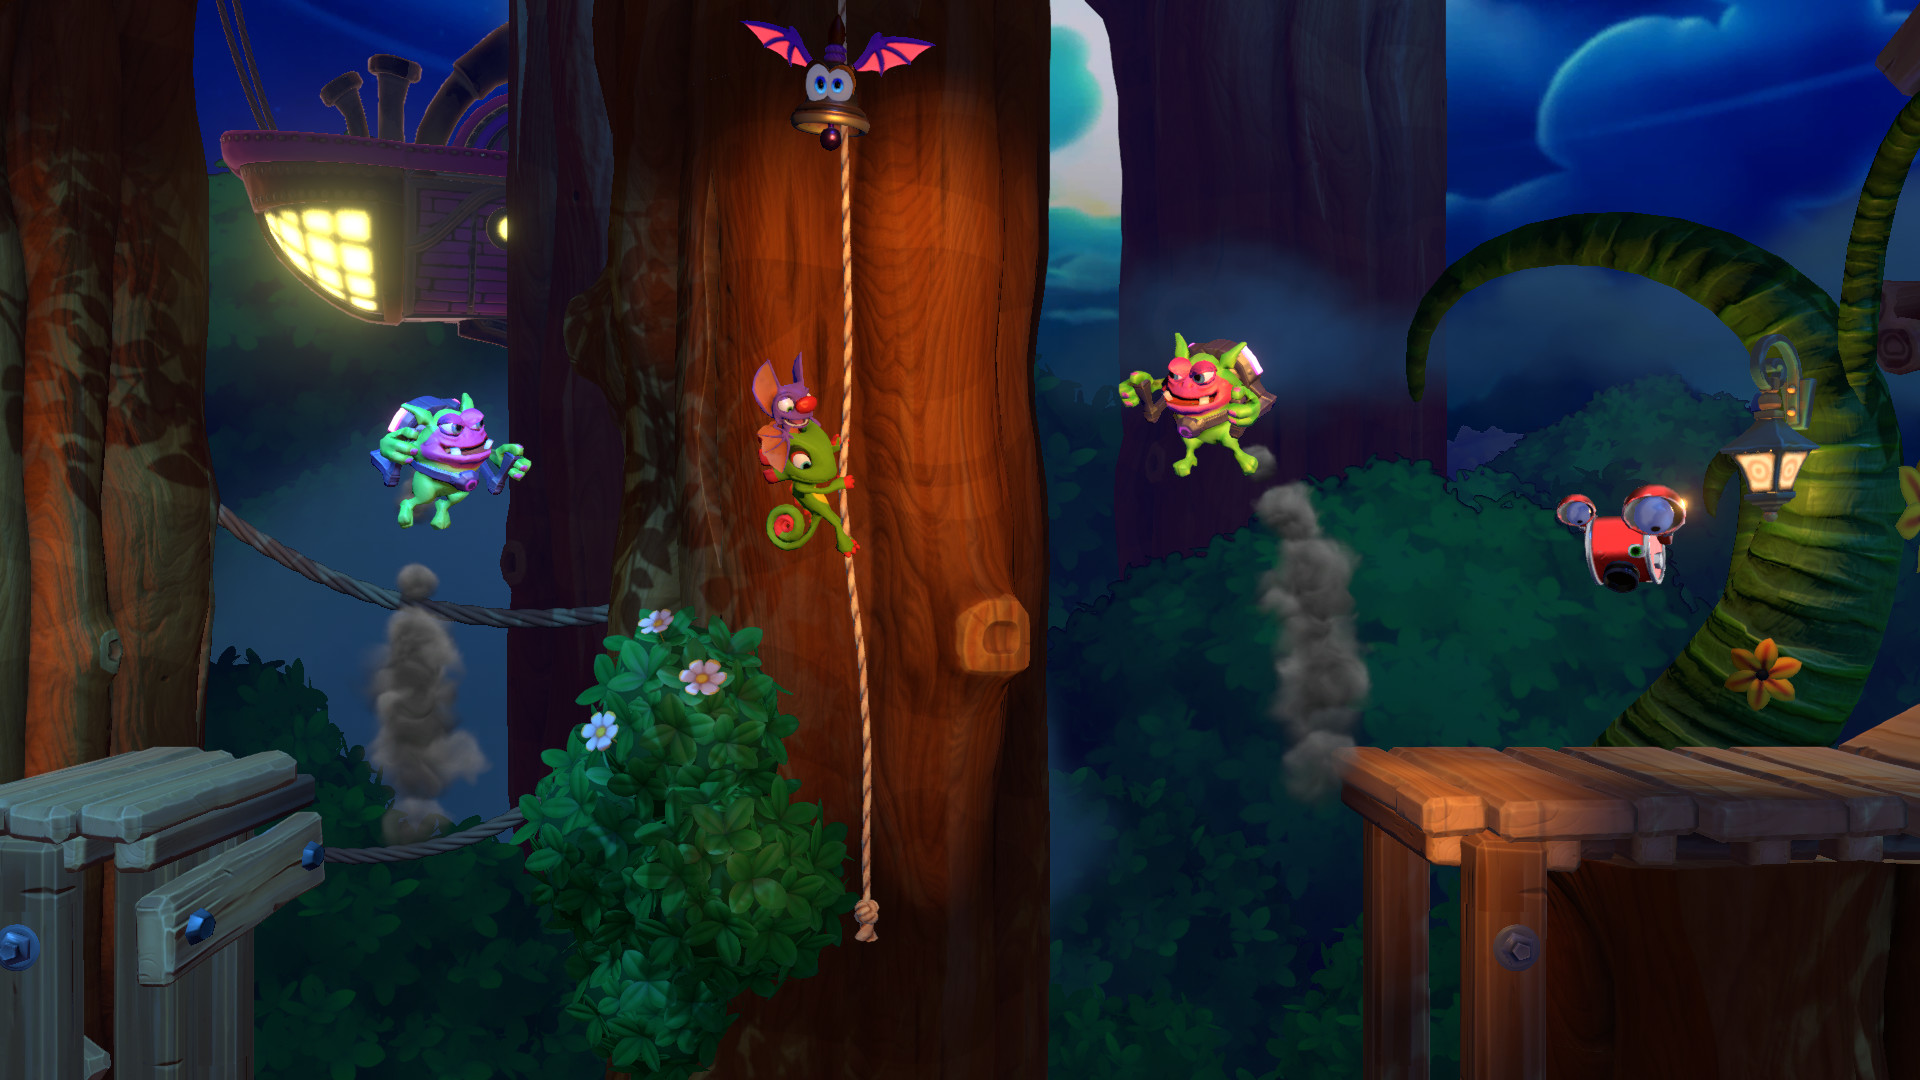 Yooka-Laylee and the Impossible Lair Free Download